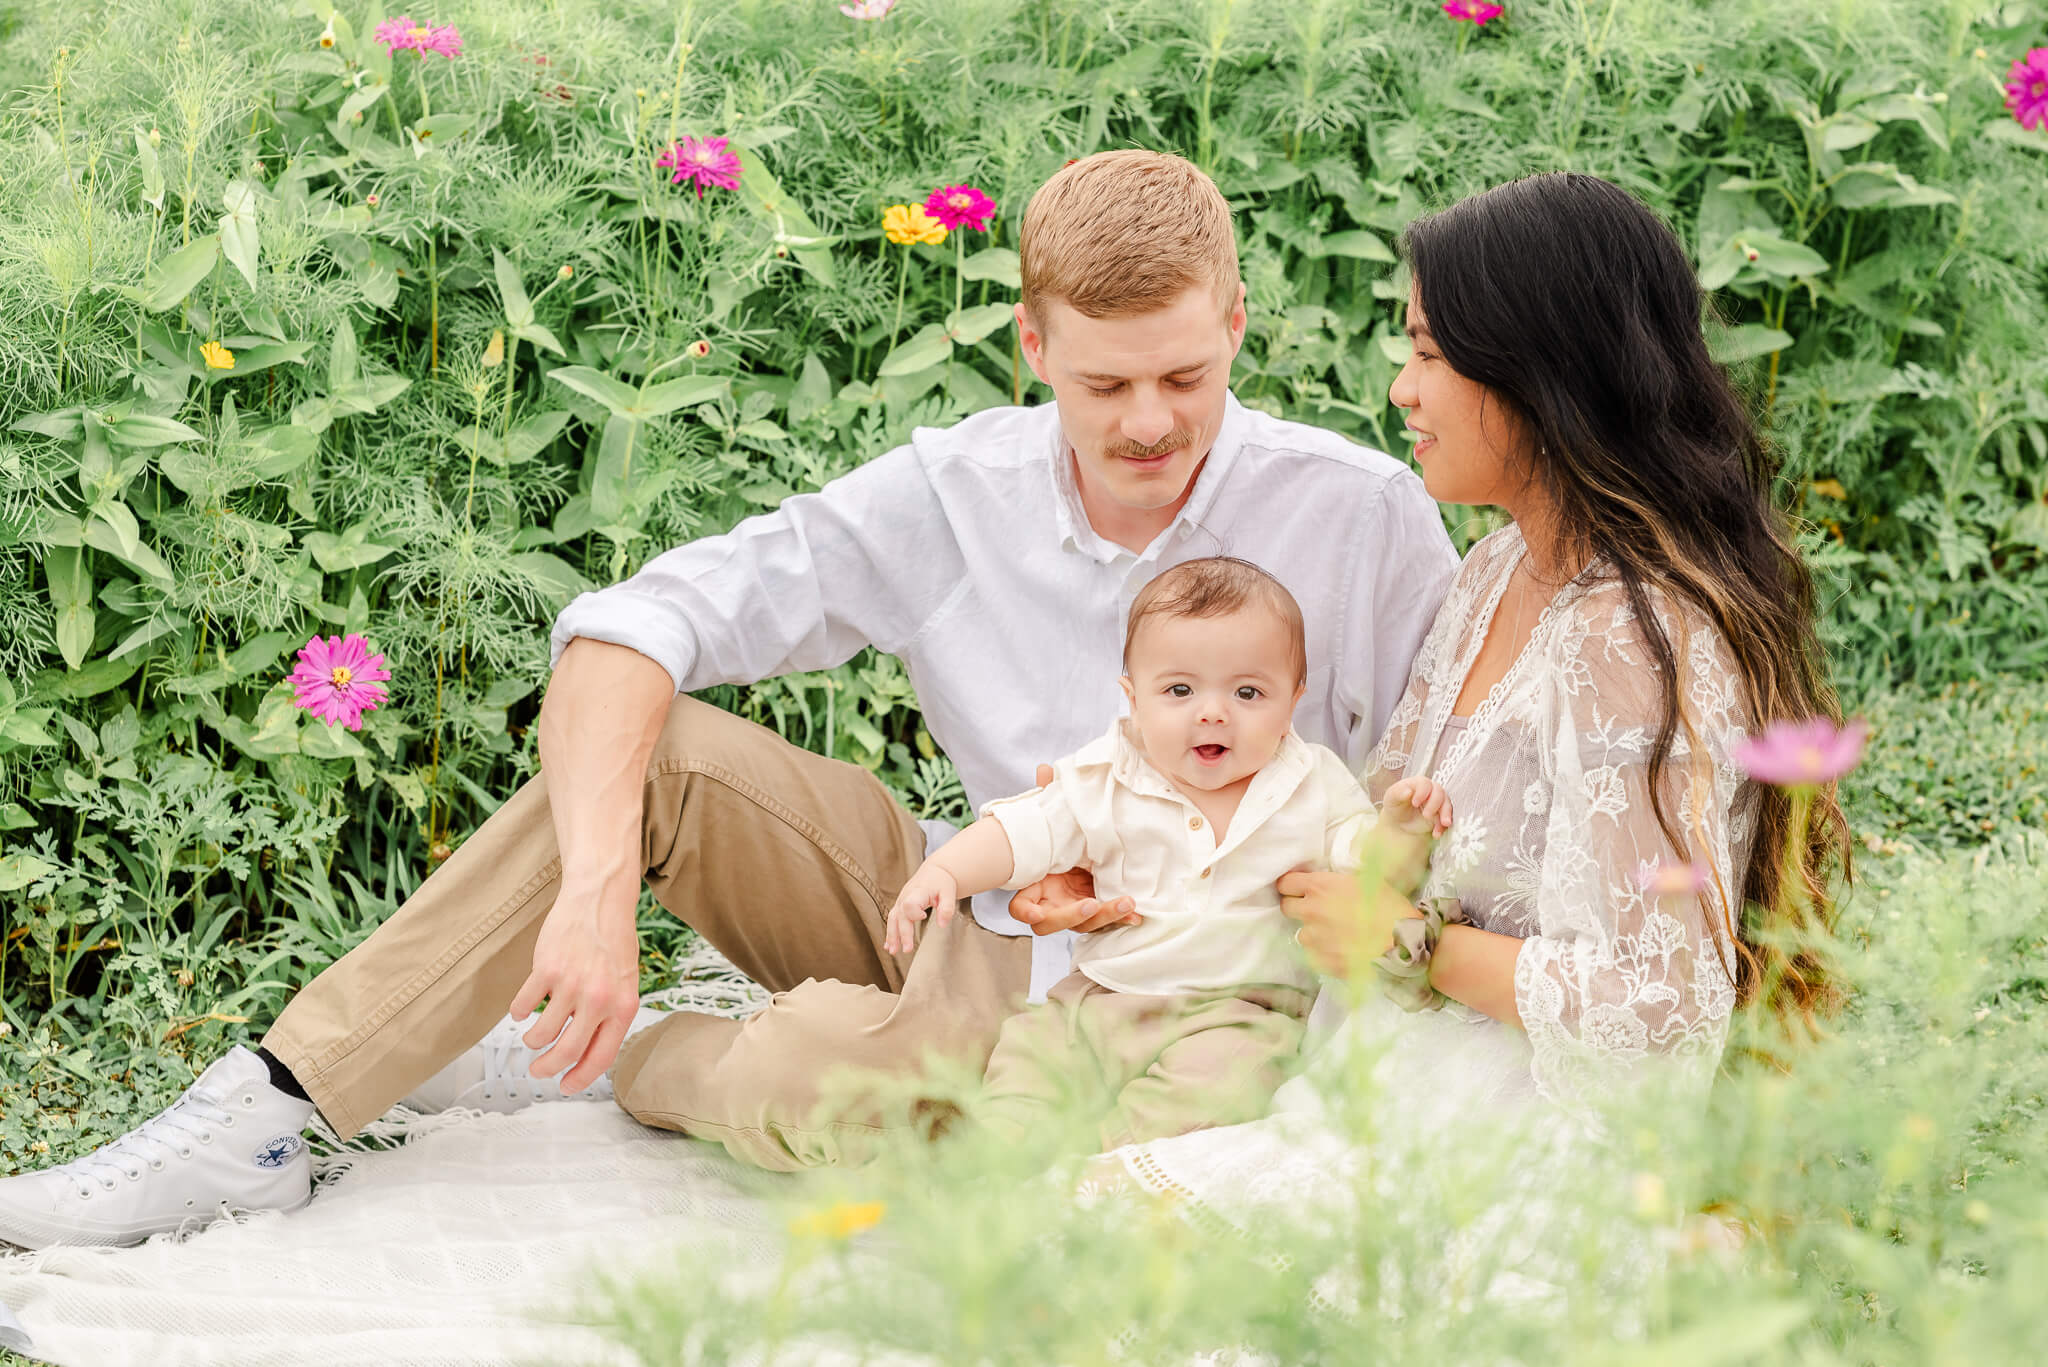 A young family sits in a field of wildflowers. They are dressed in tans and whites. The baby boy sees a pediatrician in Virginia Beach.